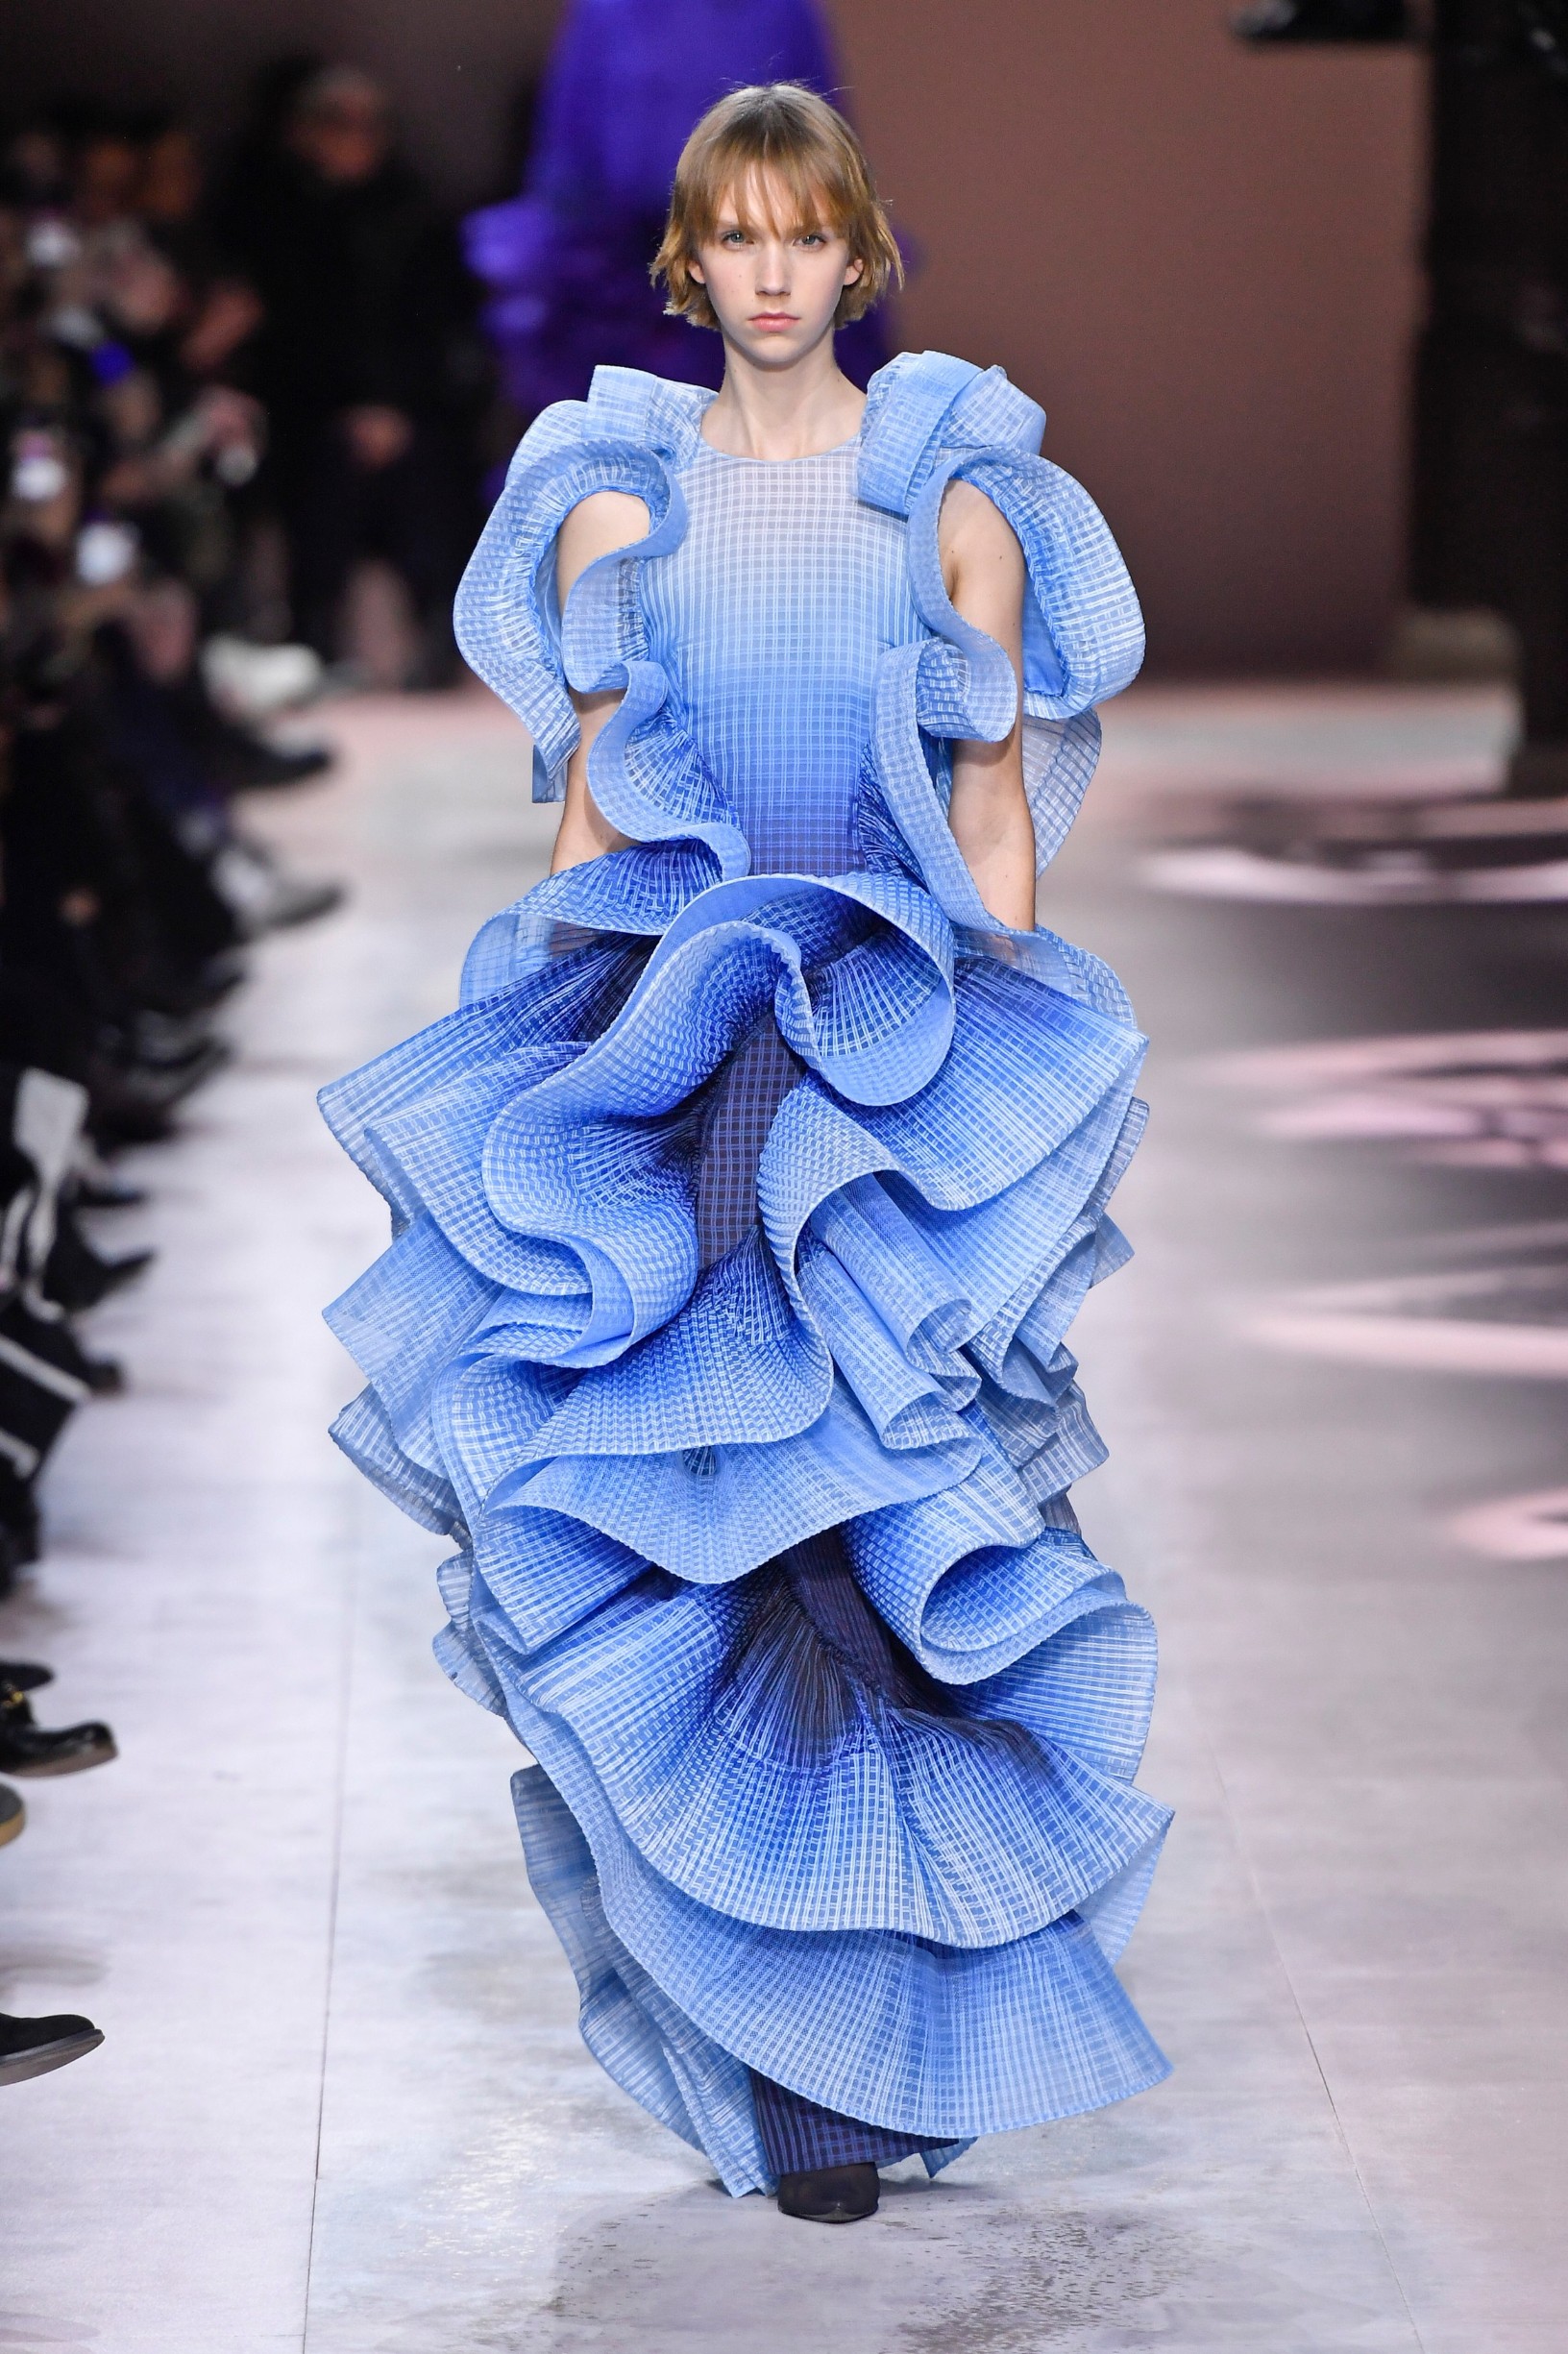 Model Bente Oortl walks on the runway during the Givenchy Haute Couture fashion show during Haute Couture Spring Summer  2020 in Paris, France on Jan. 21, 2020., Image: 494097841, License: Rights-managed, Restrictions: *** World Rights ***, Model Release: no, Credit line: Jonas Gustavsson / ddp USA / Profimedia